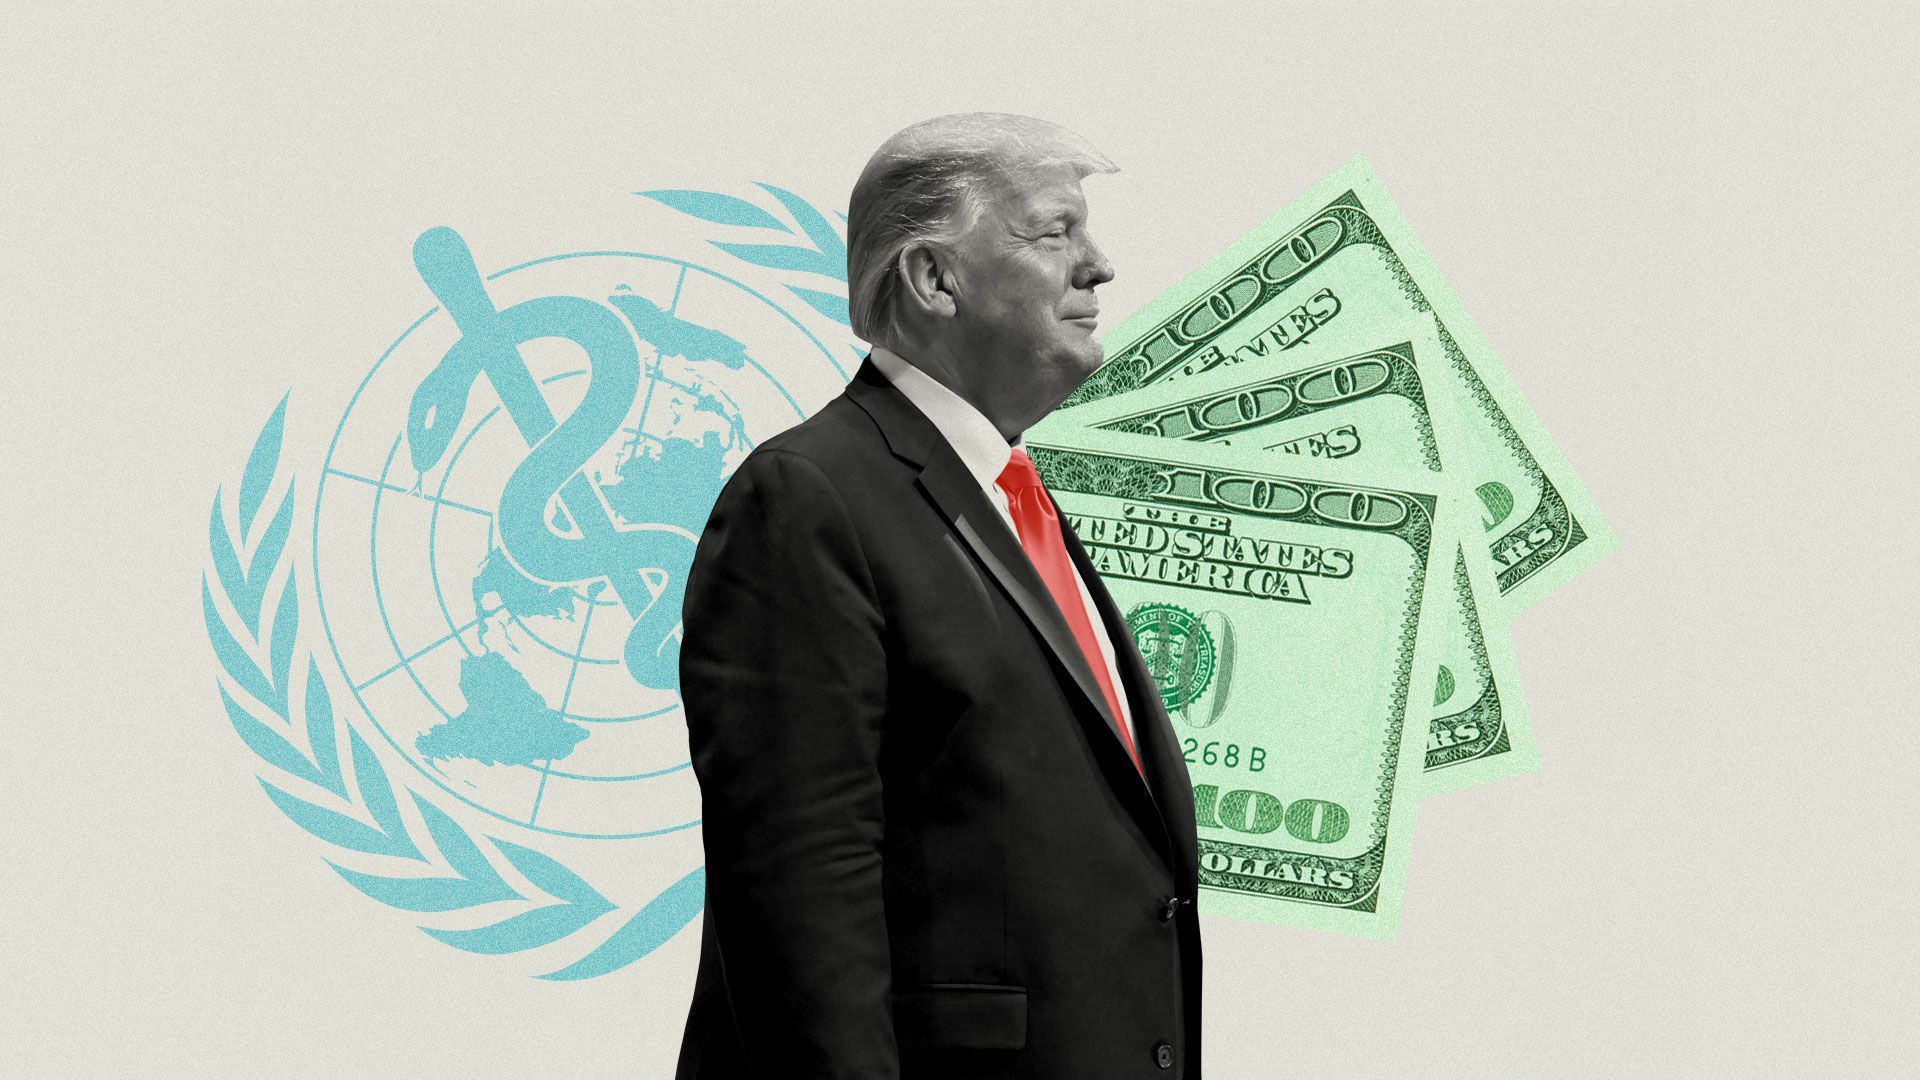 Illustration of Trump with cash and WHO symbol